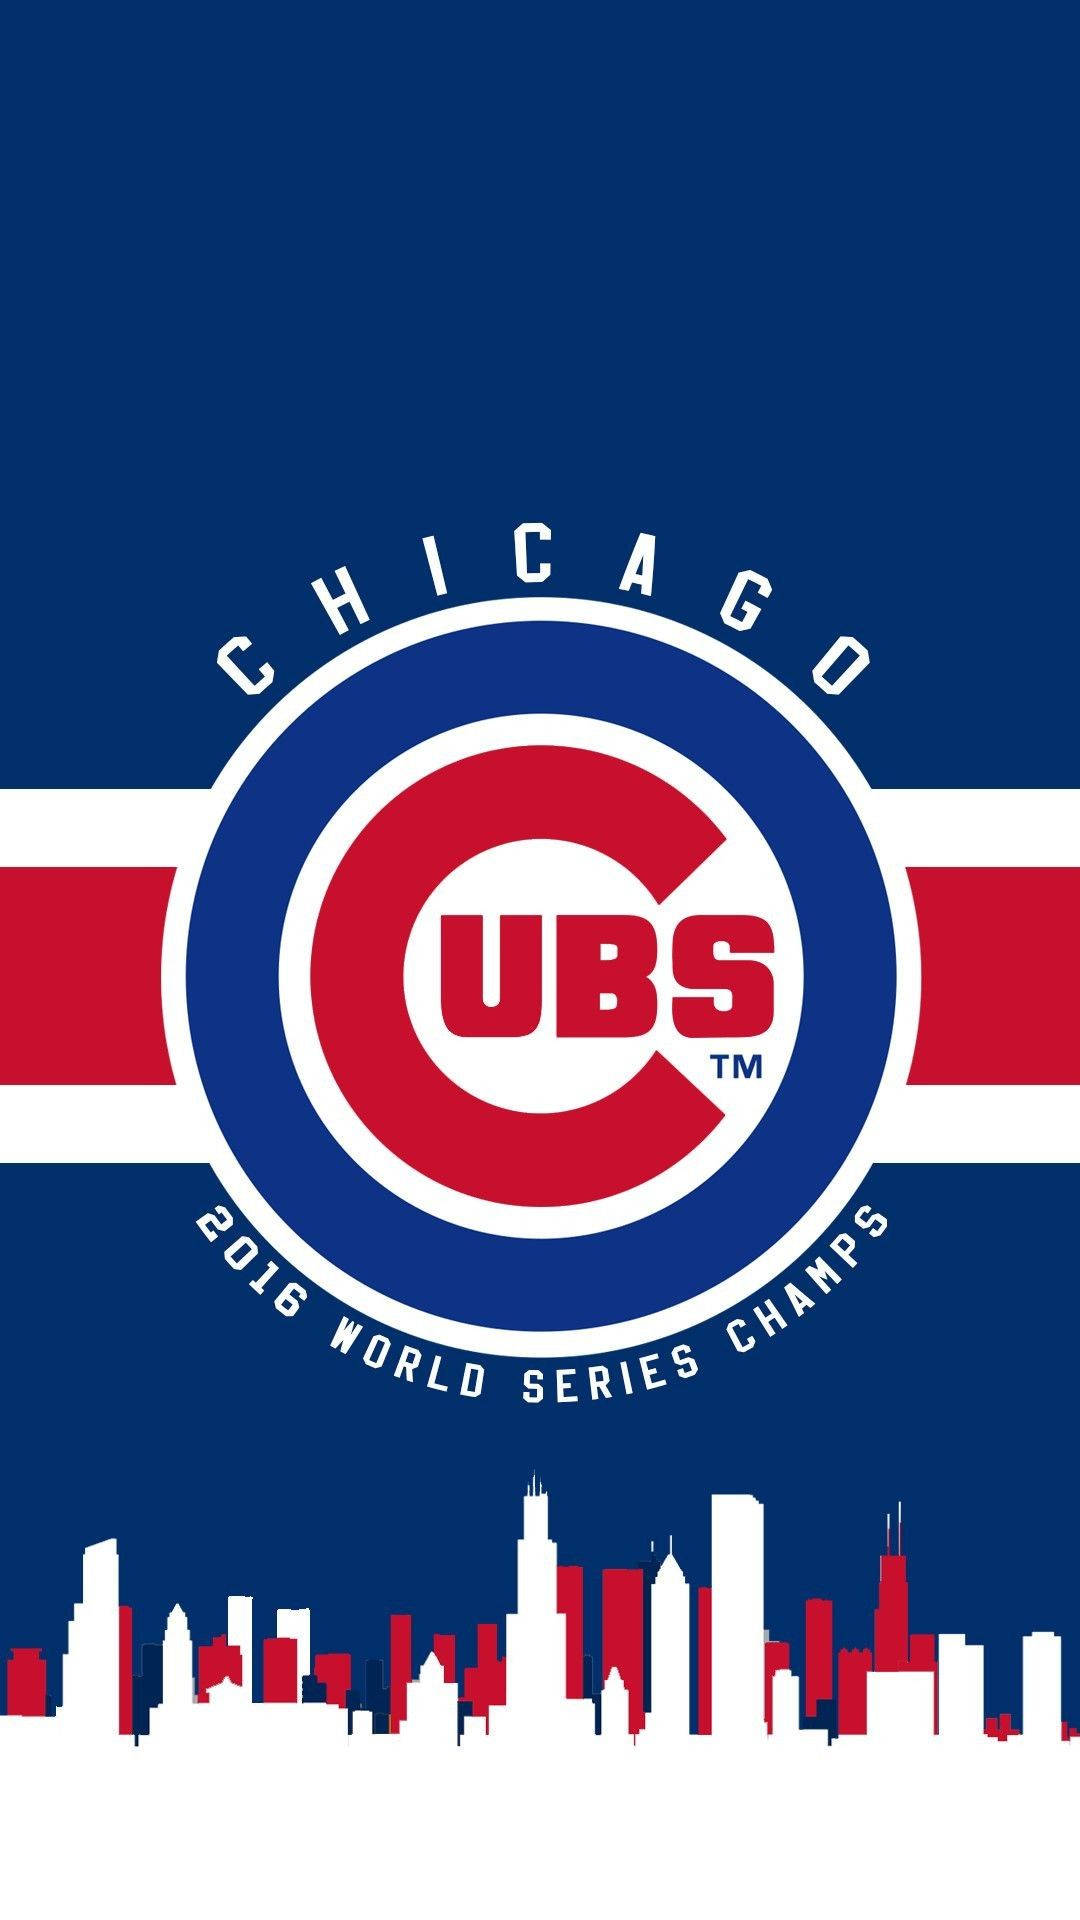 Cool Chicago Cubs Poster Background